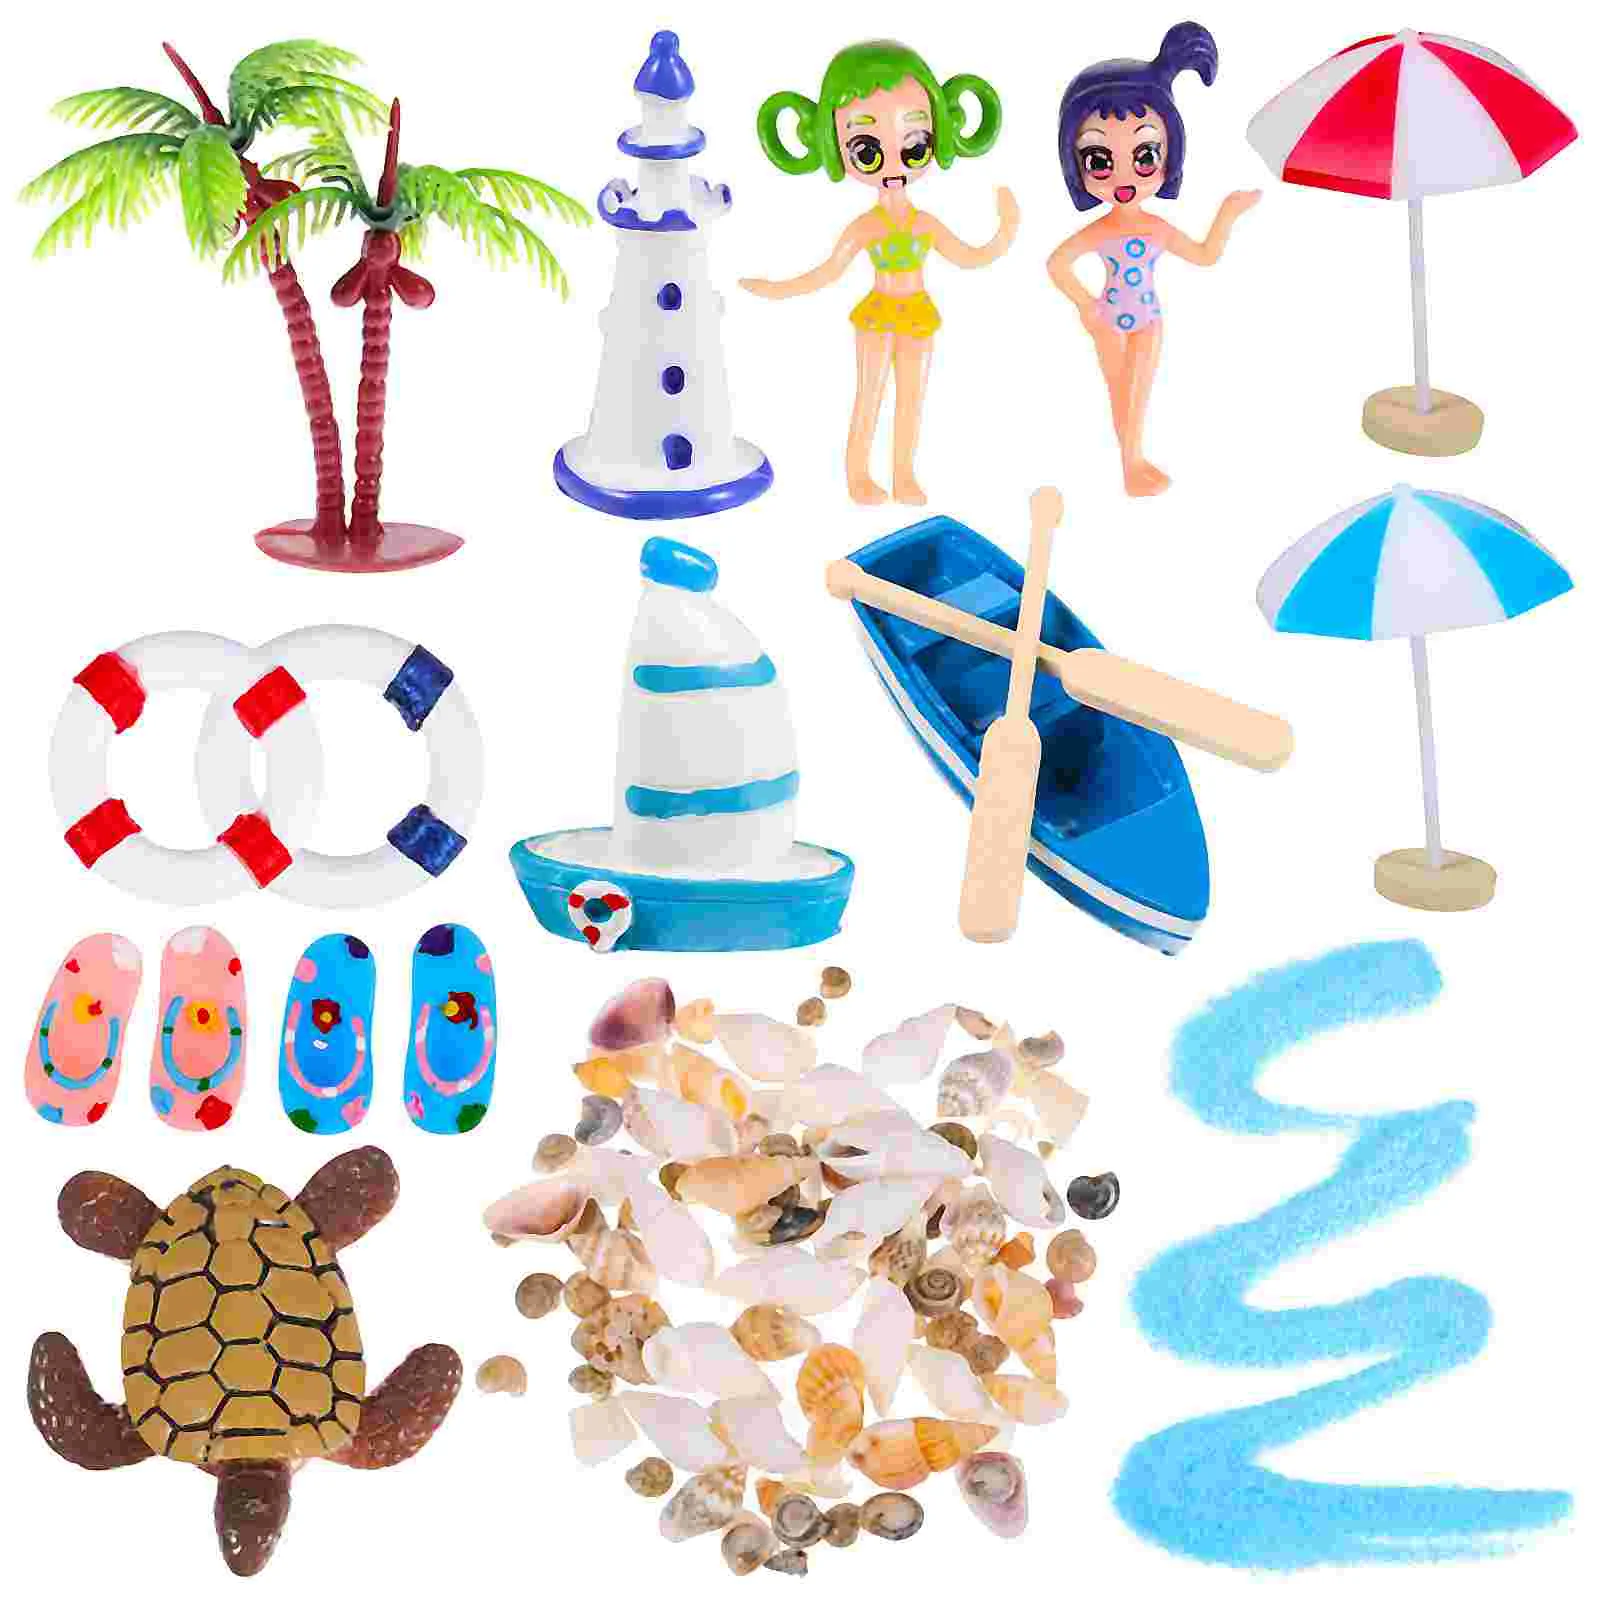 

Mini Beach Bauble Miniature Toys Decorations Tiny Figurines Palm Tree Garden Ornaments Items House Accessories Fishing Boat